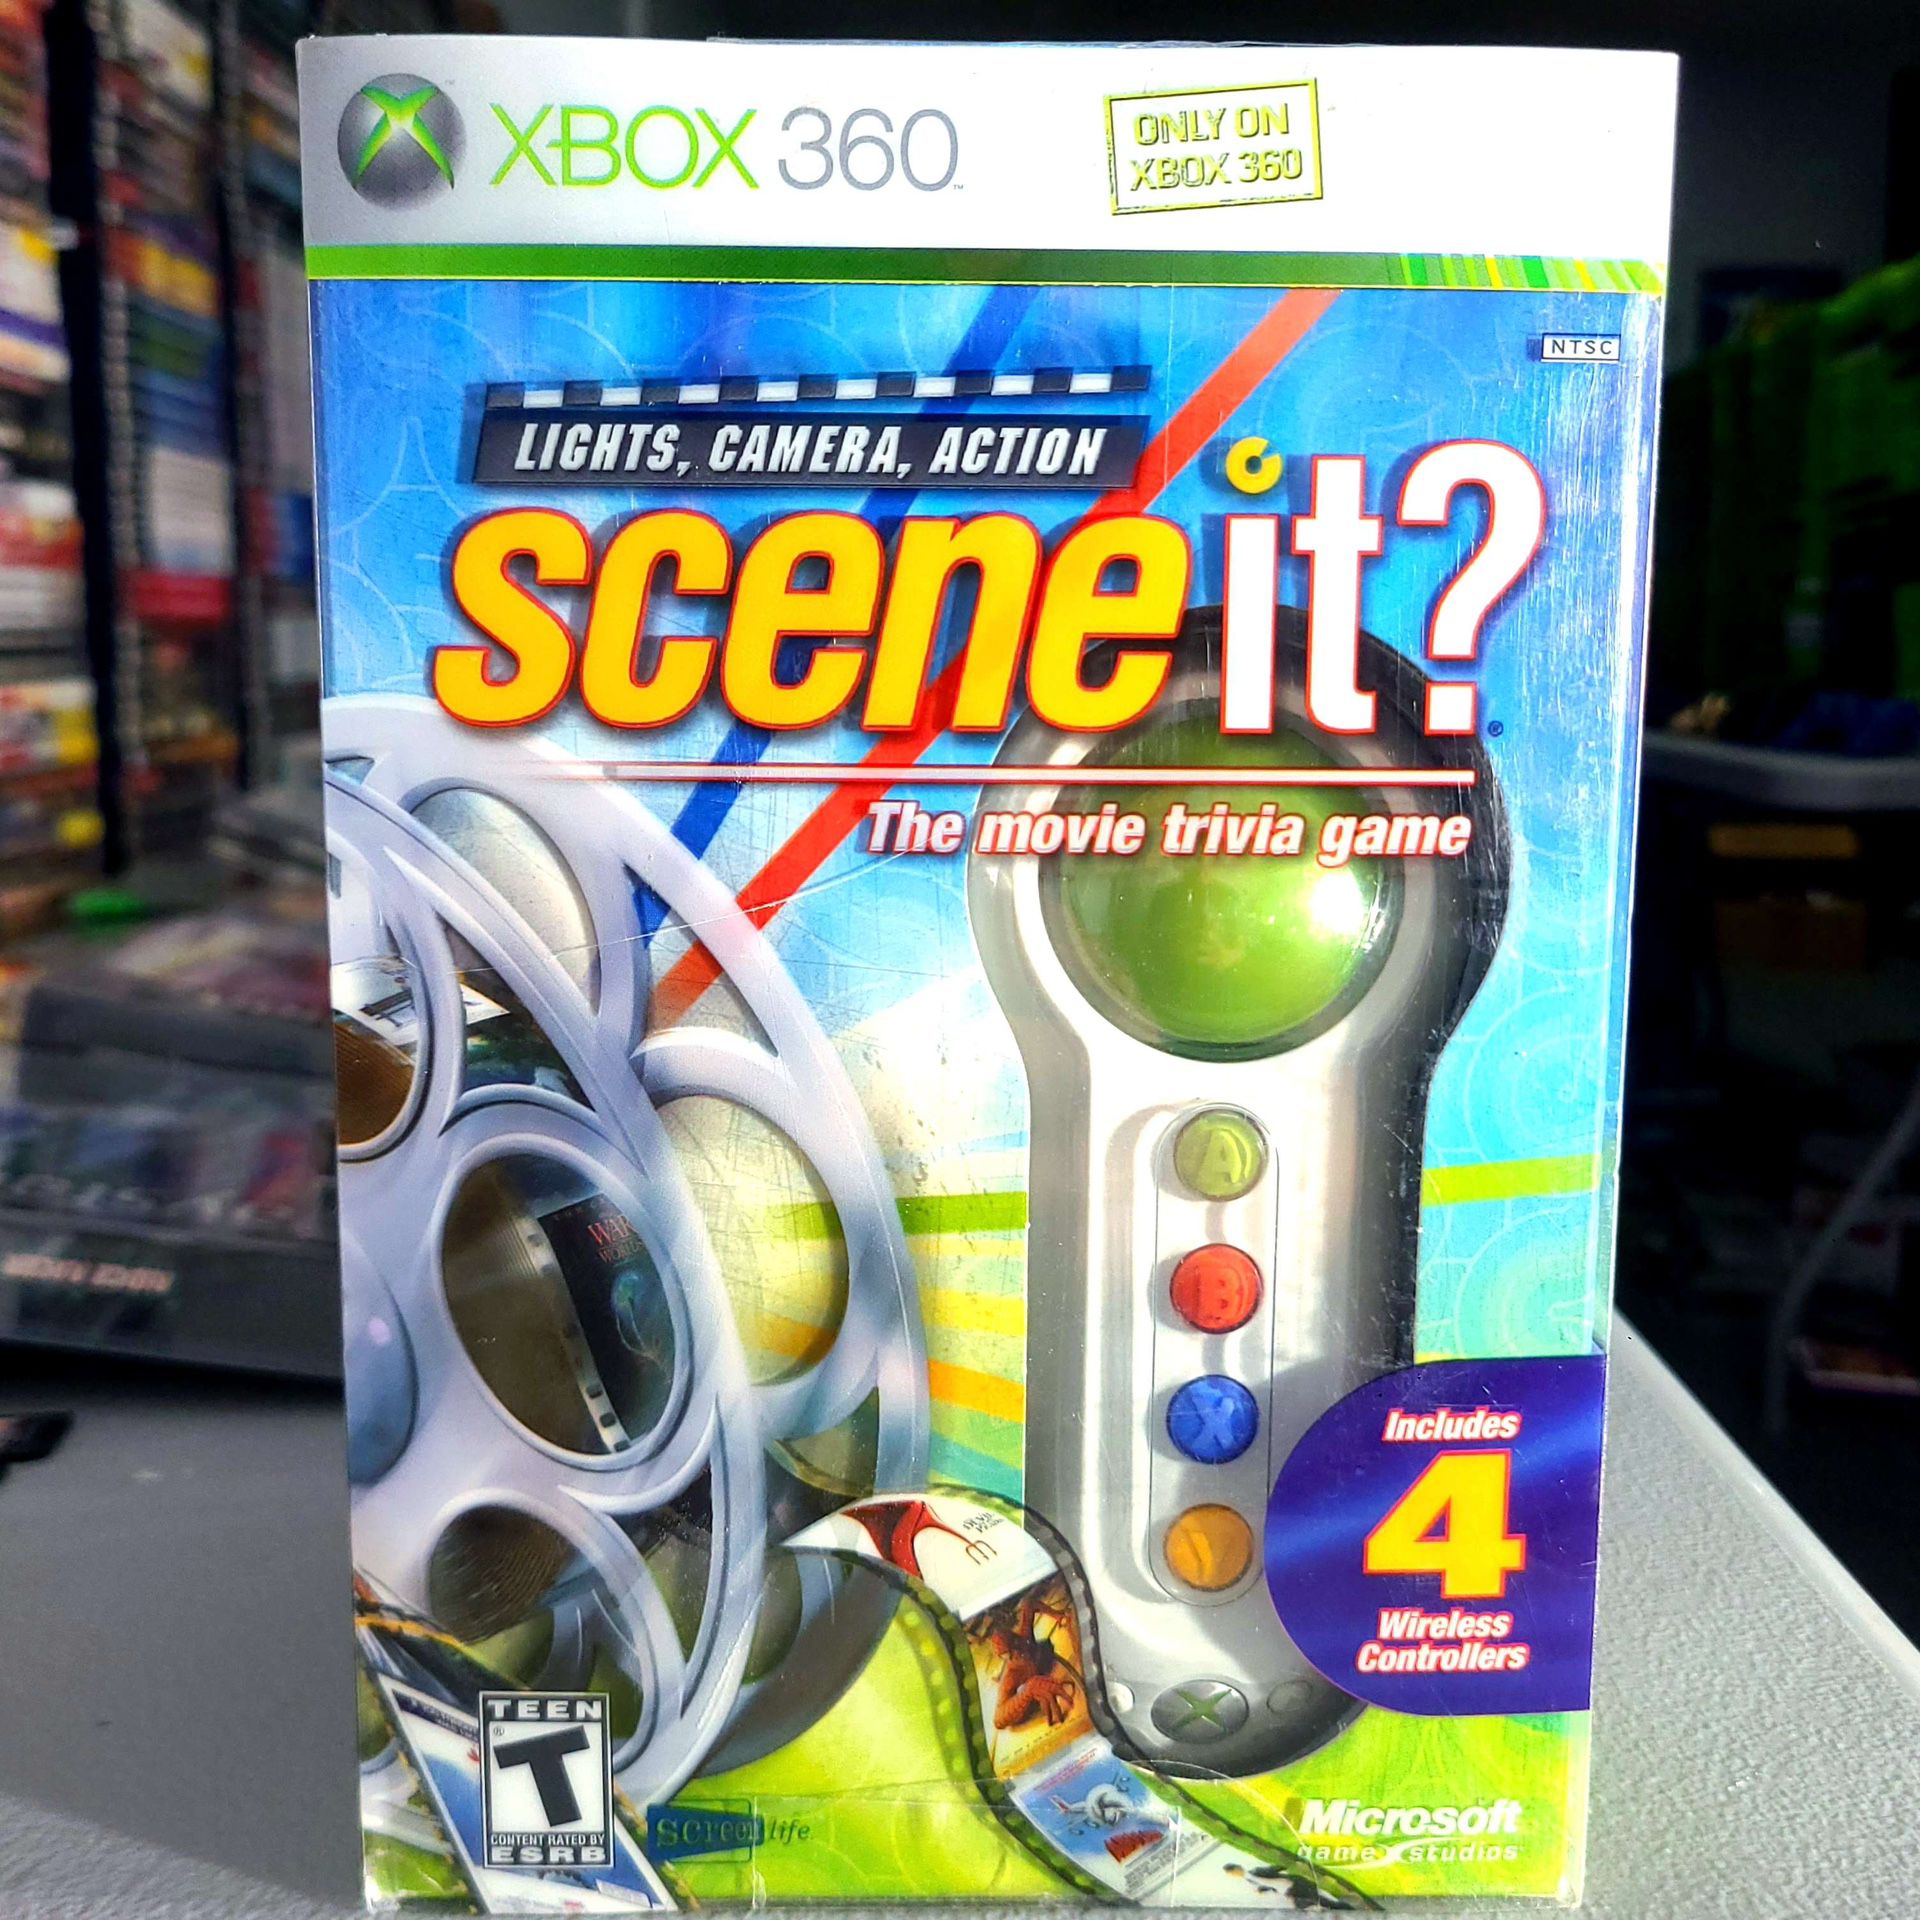 Scene It Lights, Camera, Action (Microsoft Xbox 360, 2007)    *TRADE IN YOUR OLD GAMES FOR CSH OR CREDIT HERE/WE FIX SYSTEMS*